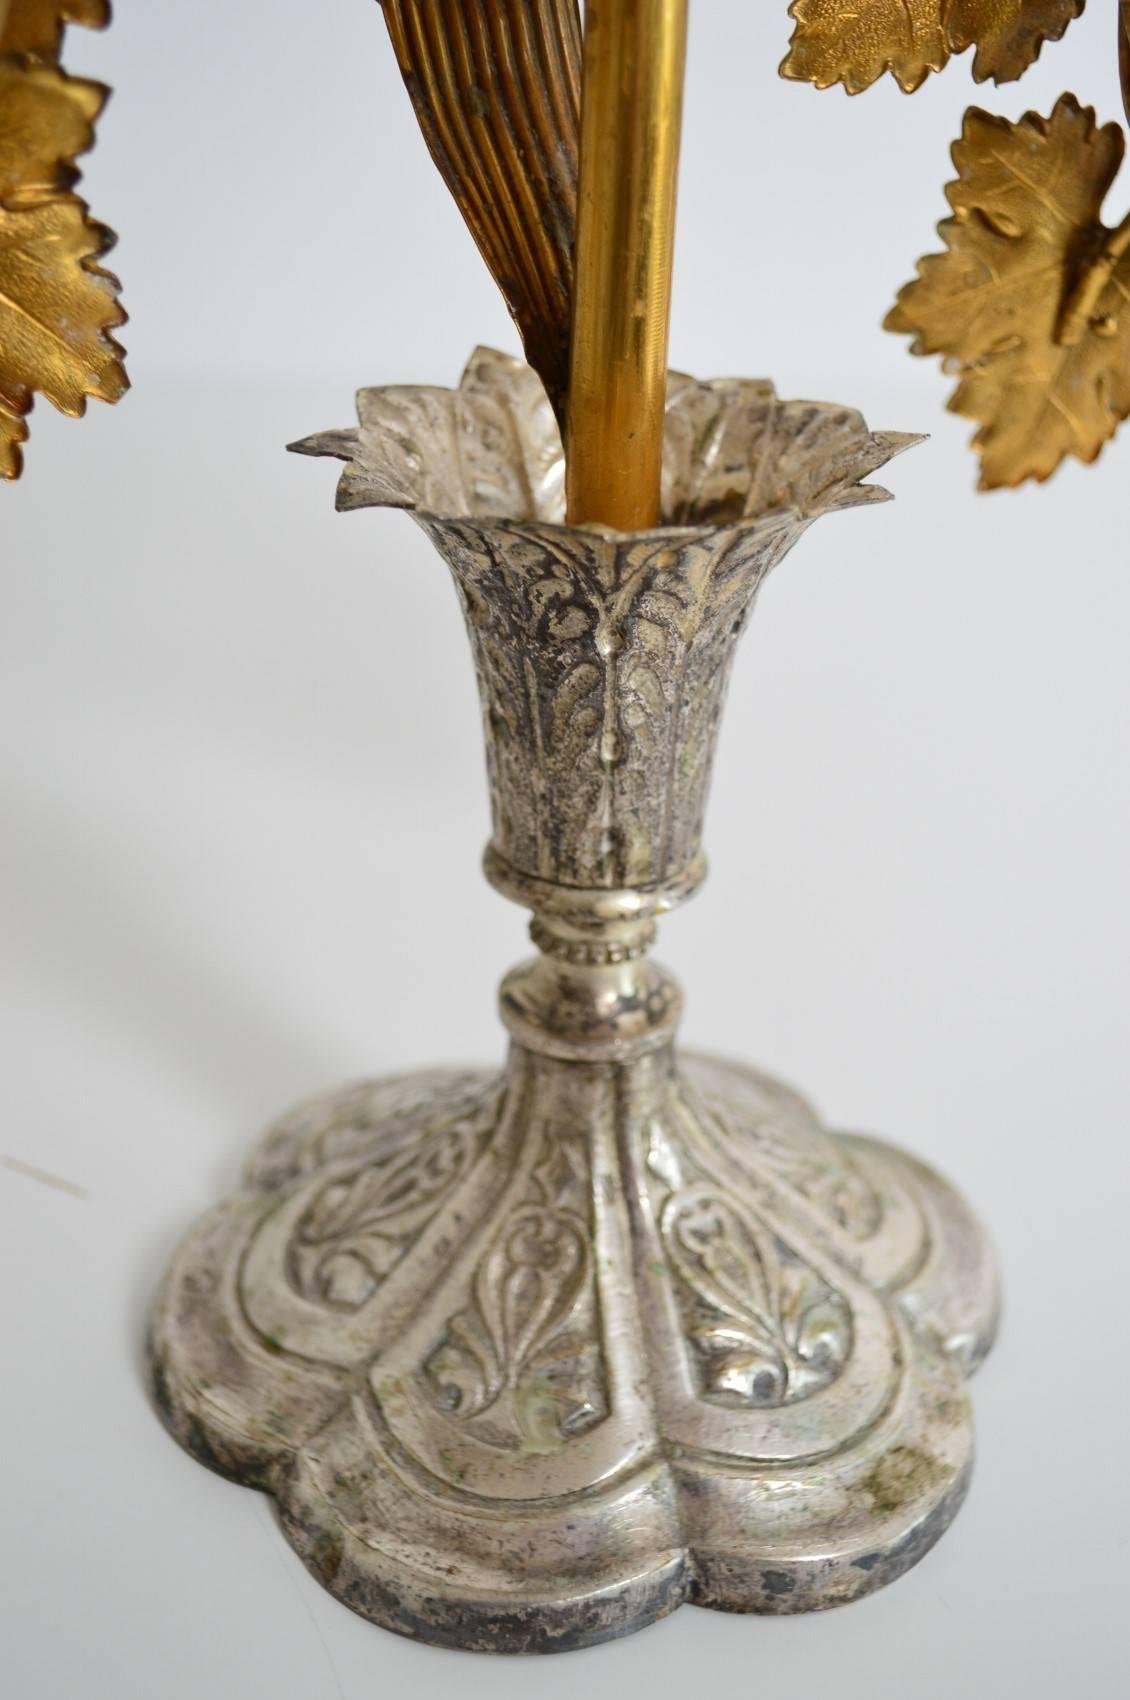 Gilt Antique Decorative Candlestick Holders with Flowers, Leafs and Wheat, 1890s